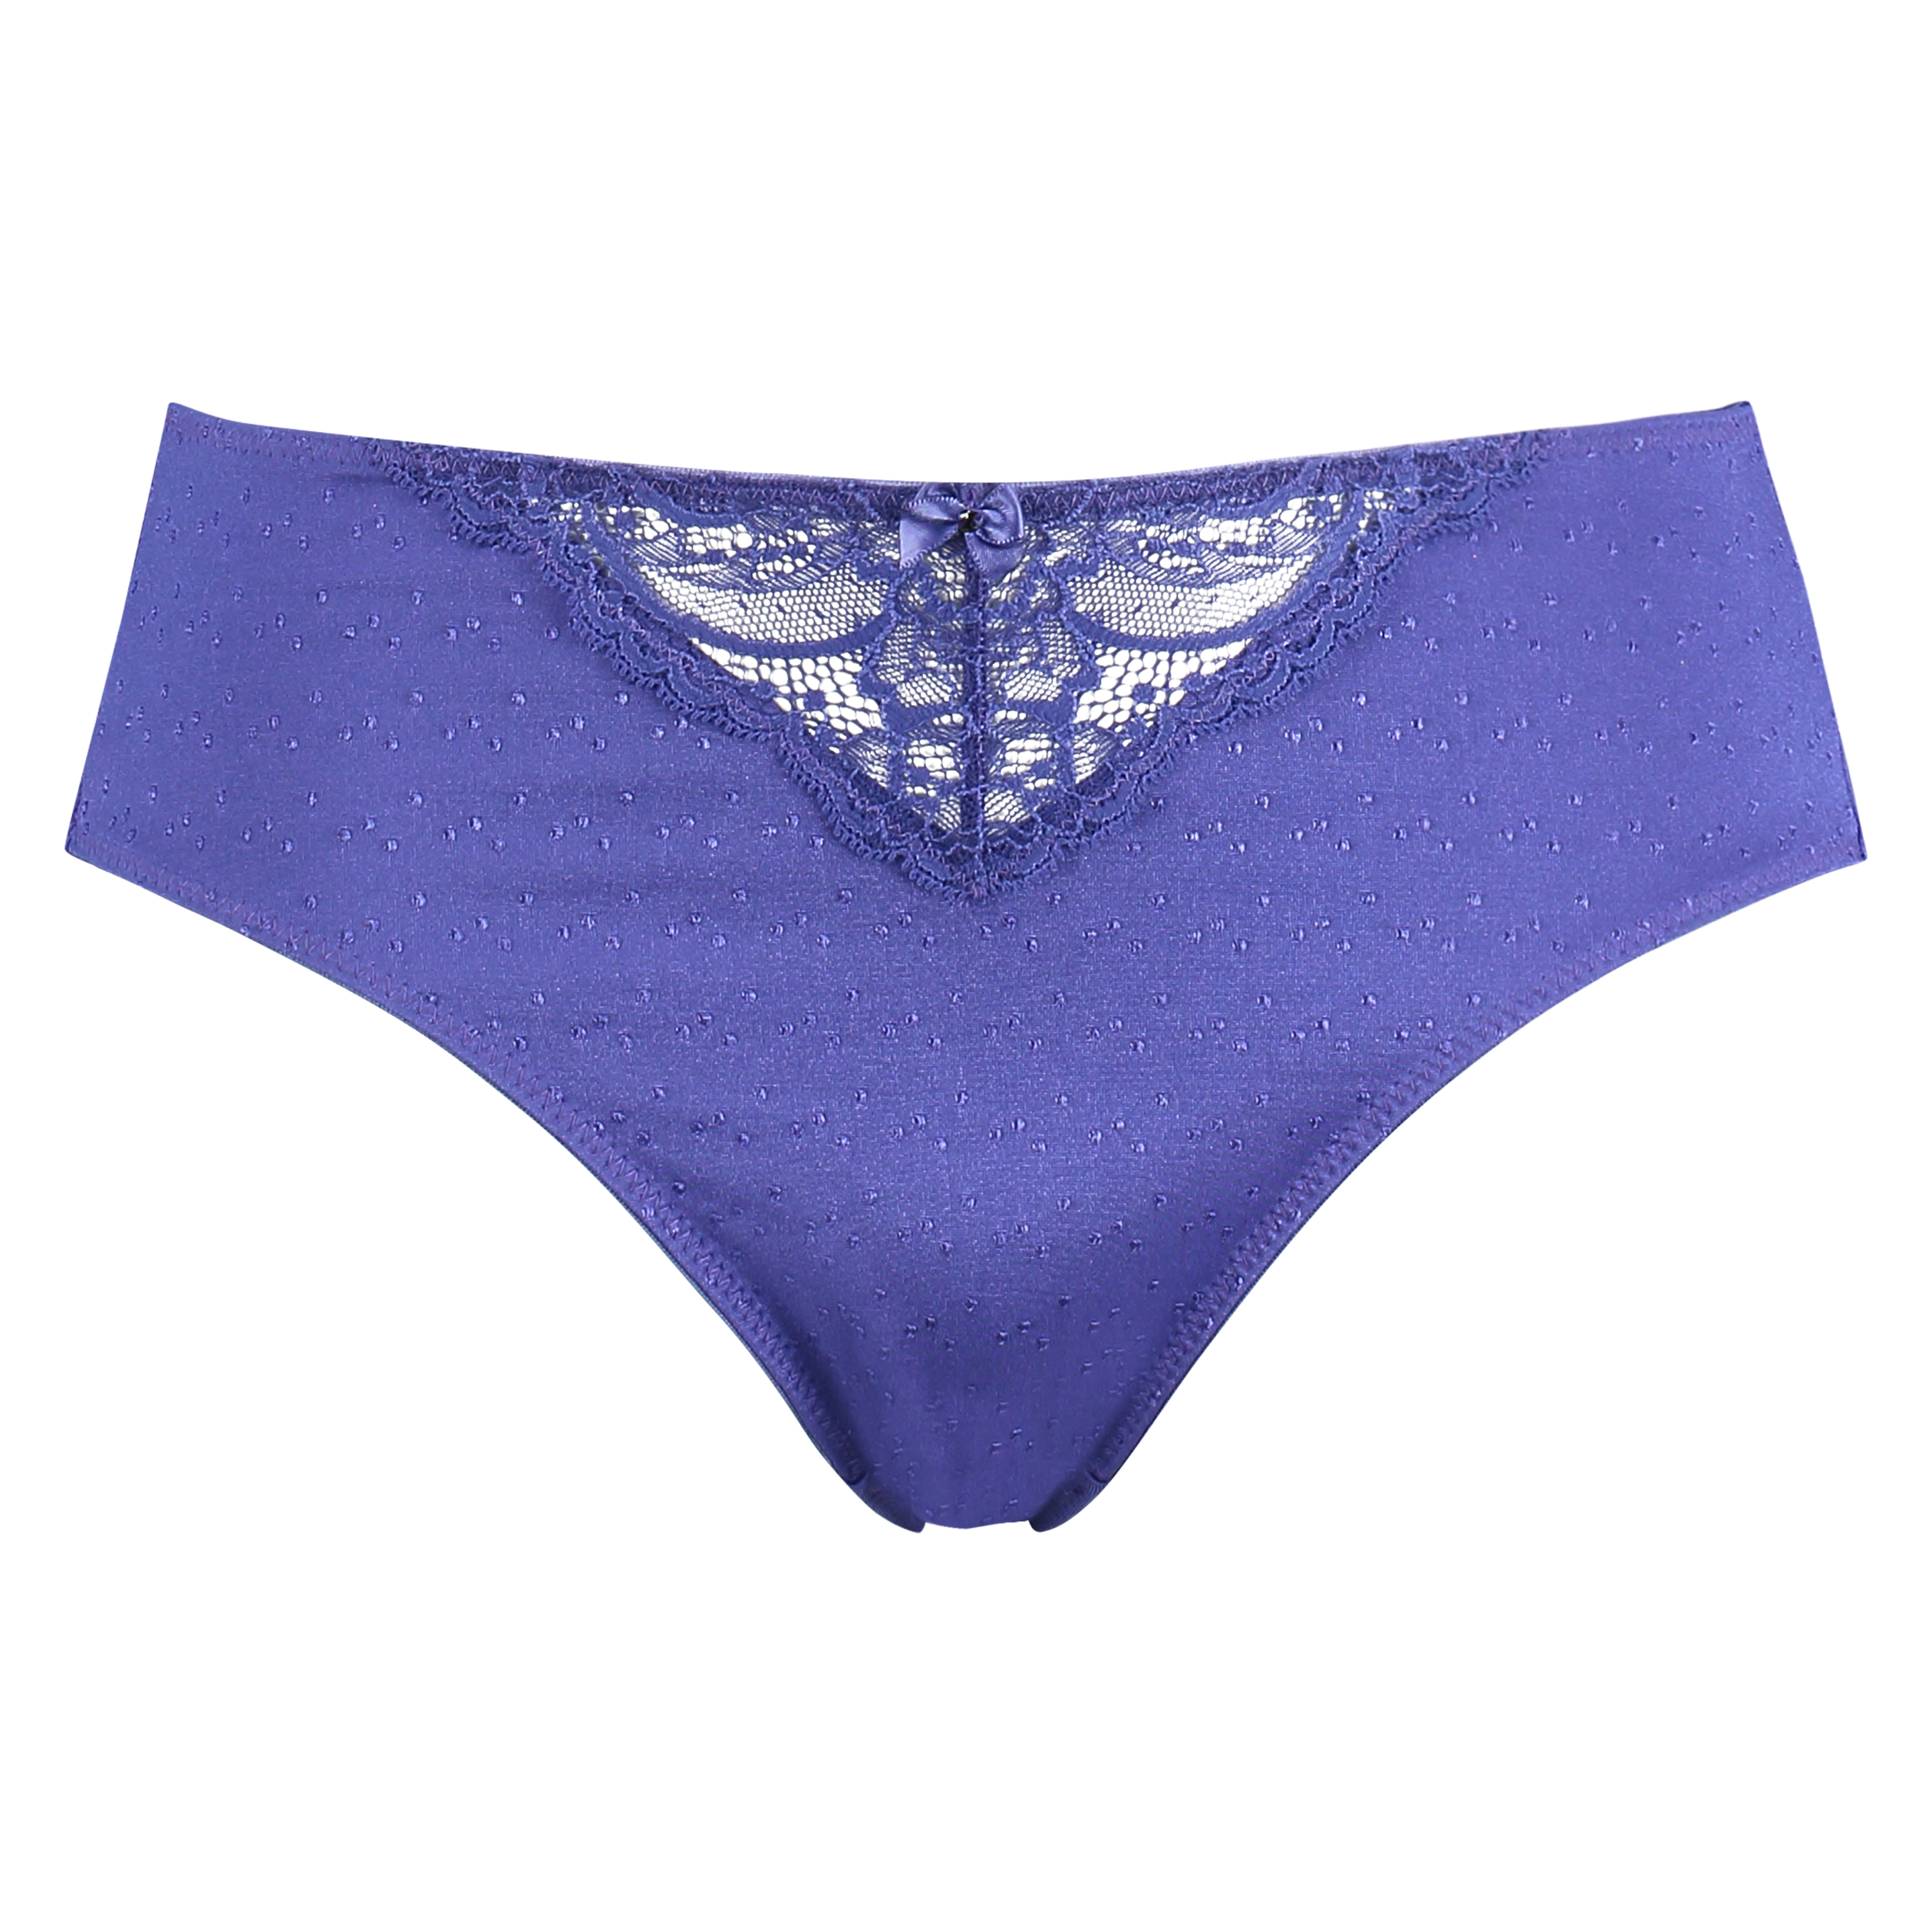 Sophie High Knickers, Blue, main